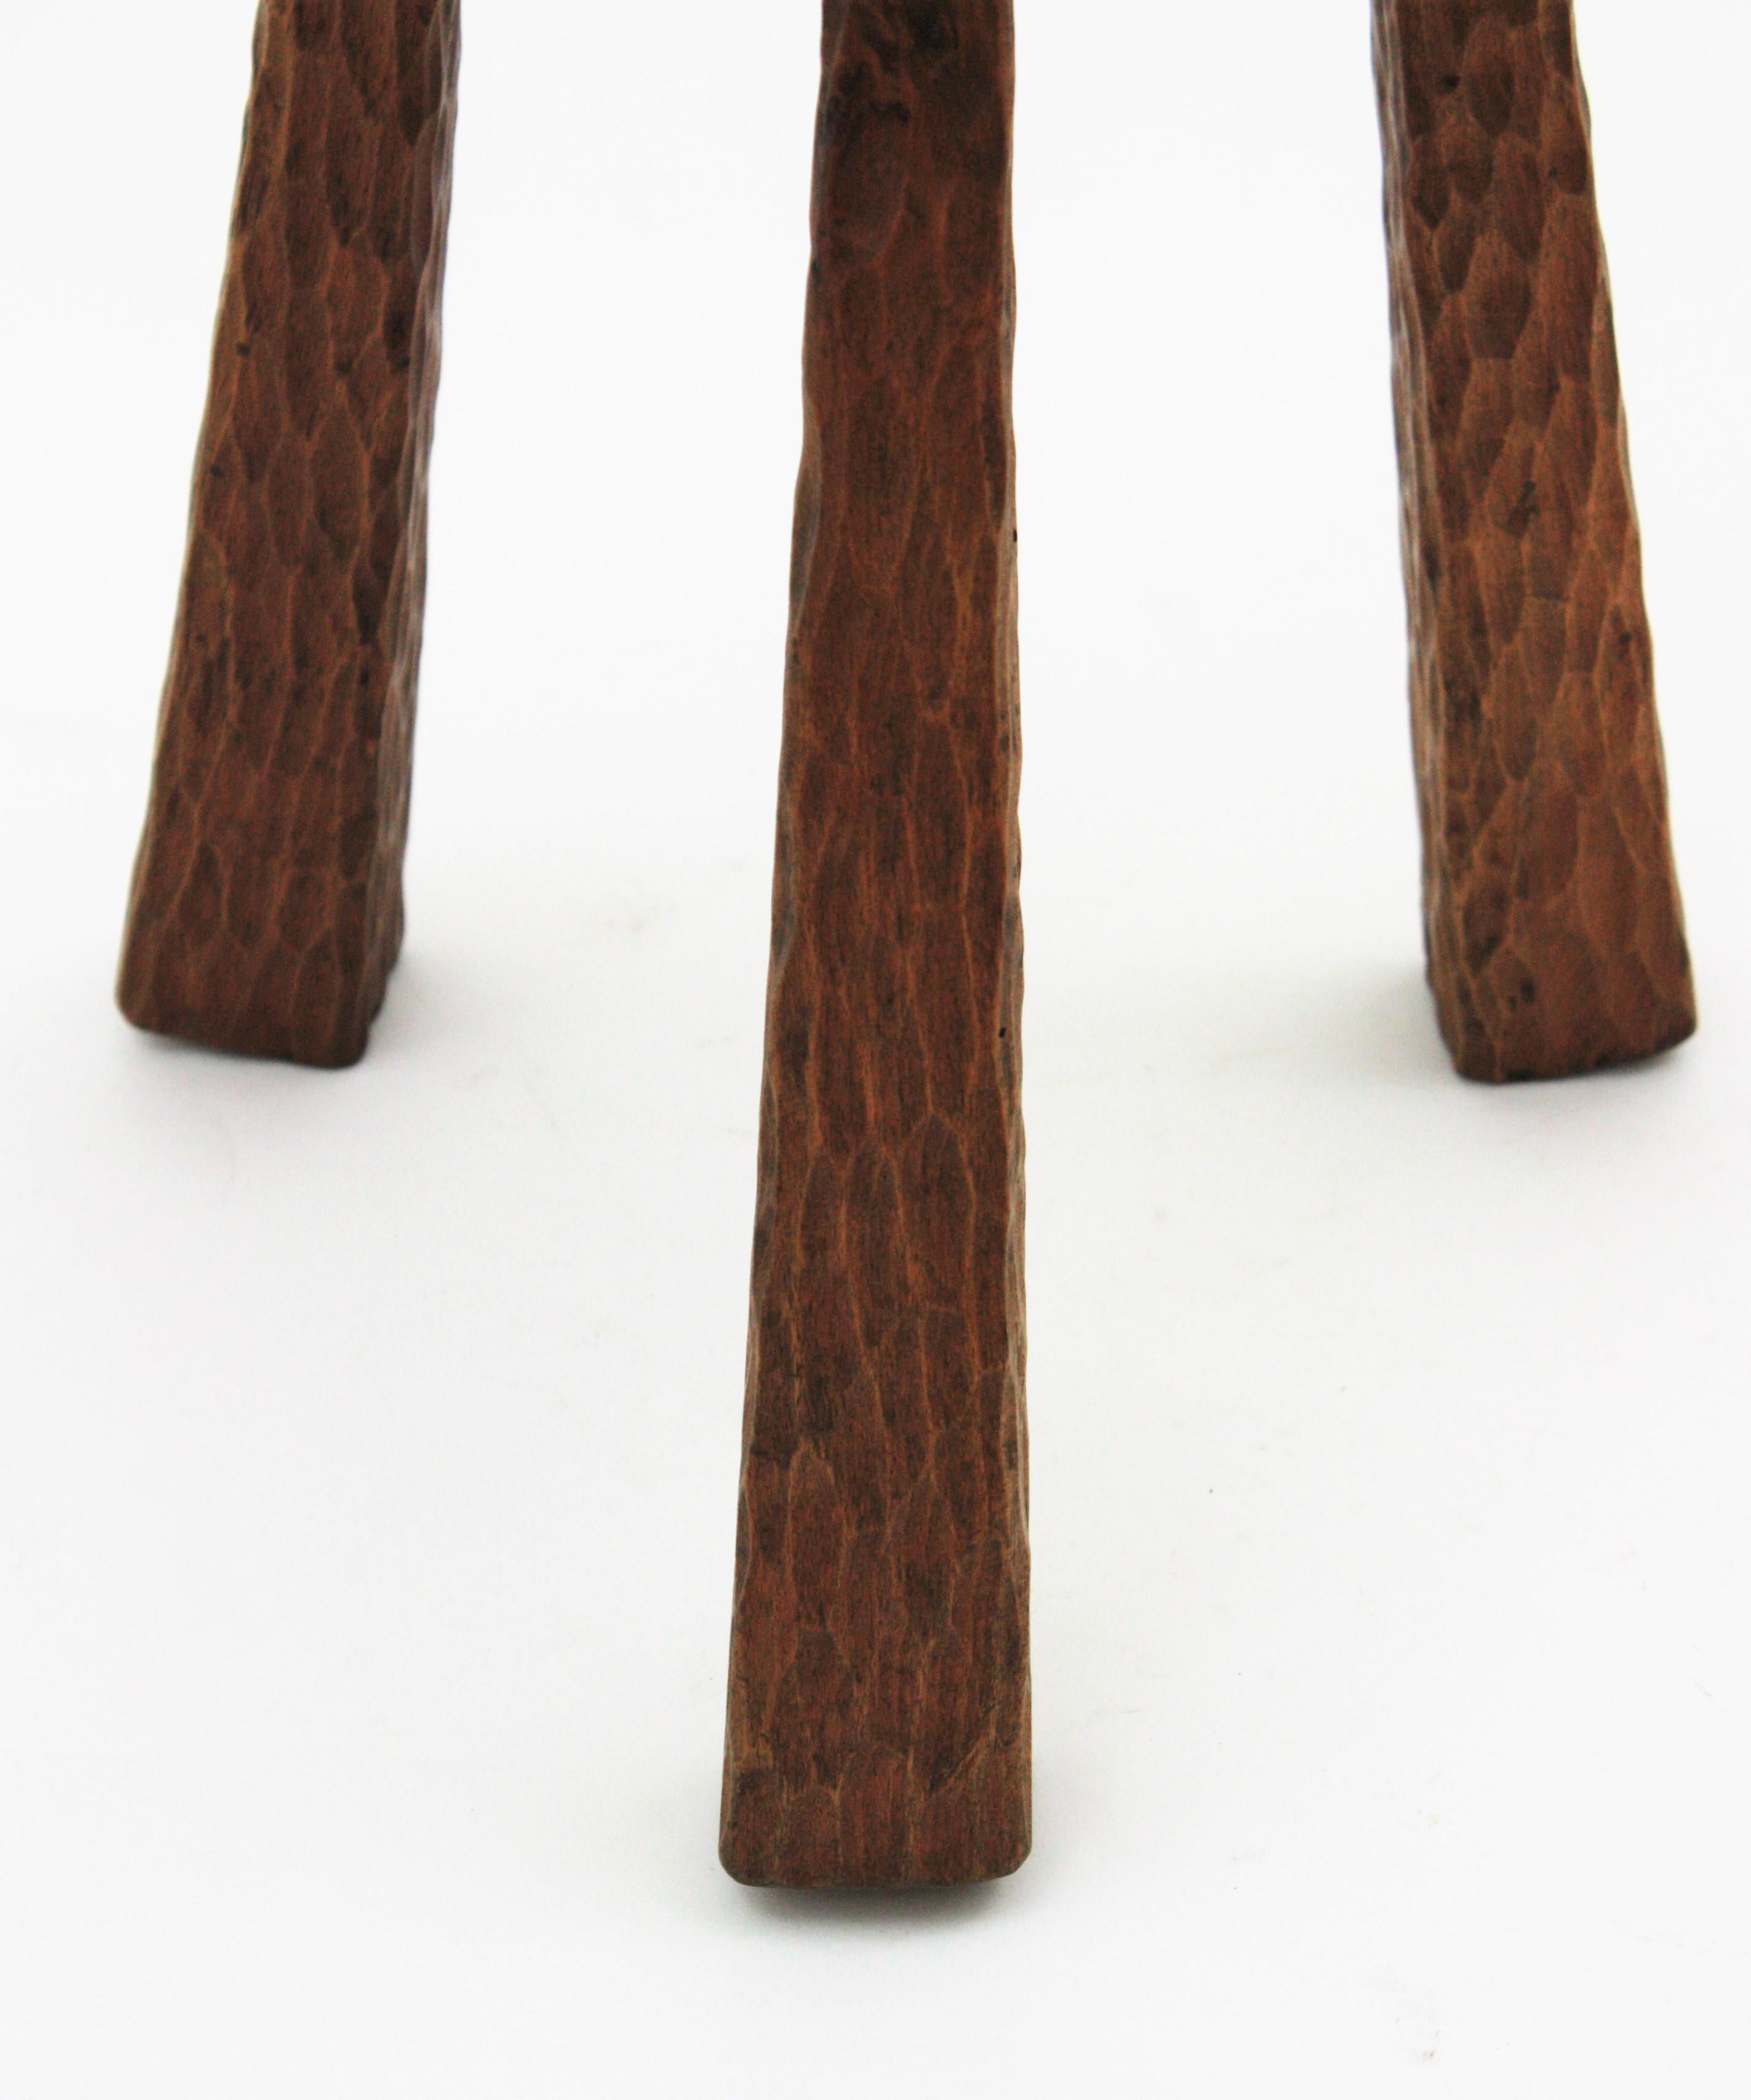 Spanish Rustic Wood Tripod Stool or Side Table For Sale 13